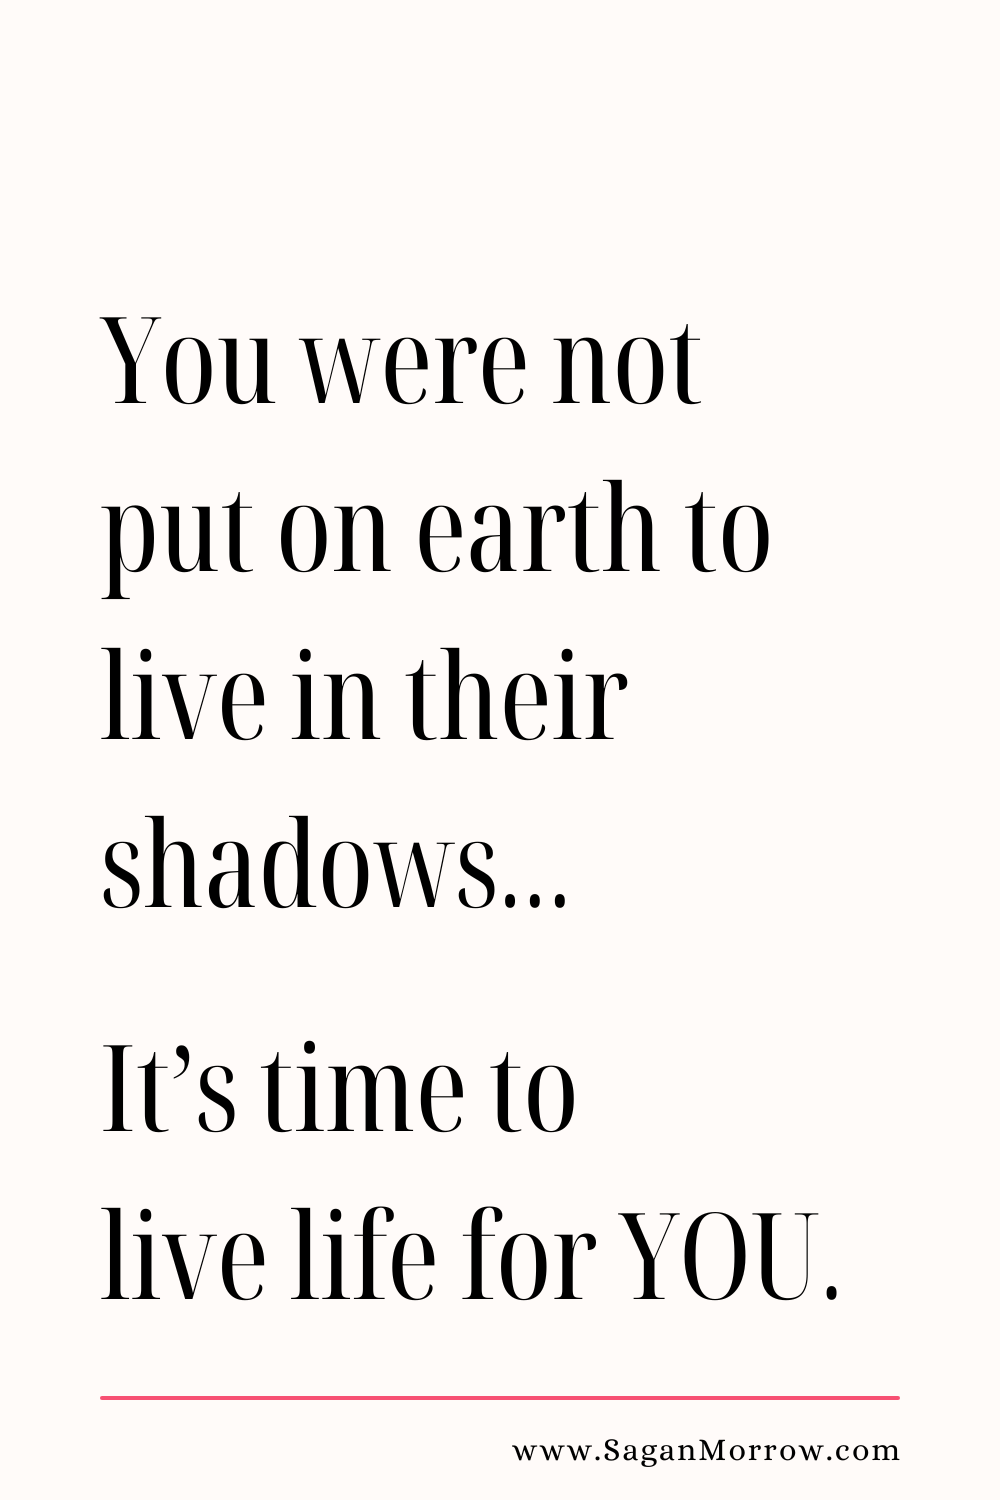 You were not put on earth to live in their shadows... it's time to live life for YOU - people pleasing quotes